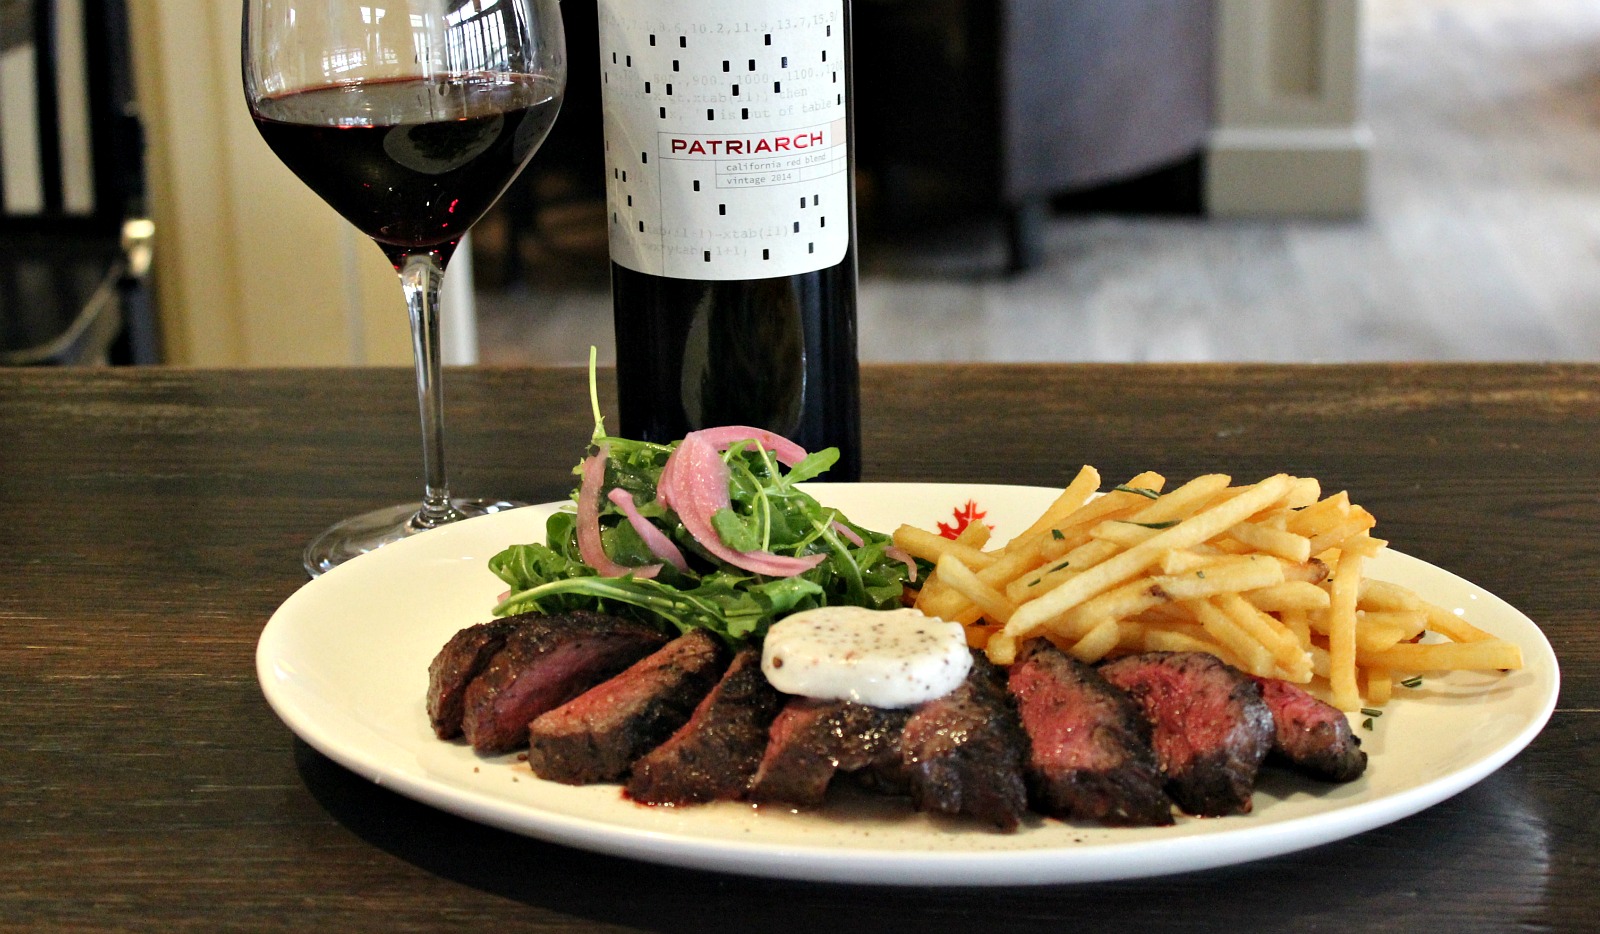 Steak frites with Patriarch red wine in the background